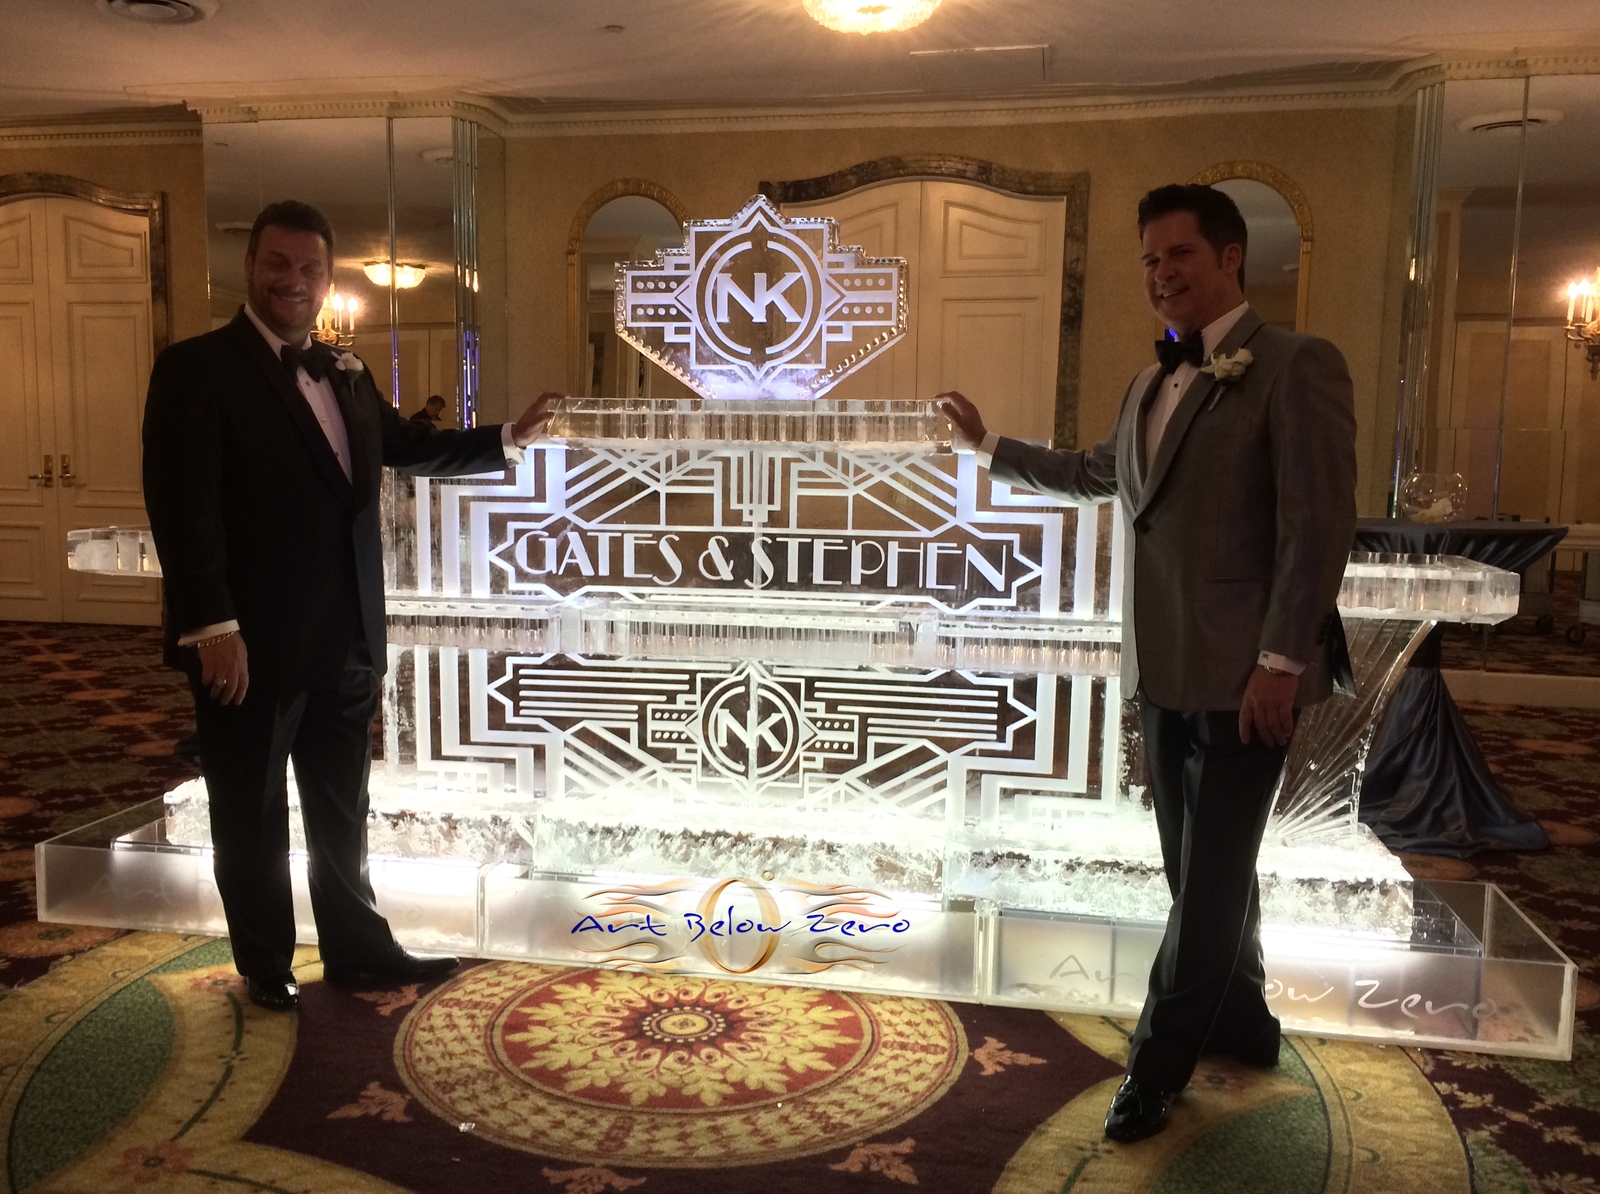 Art_deco_seafood_table_for_gates_and_stephen_ice_sculpture